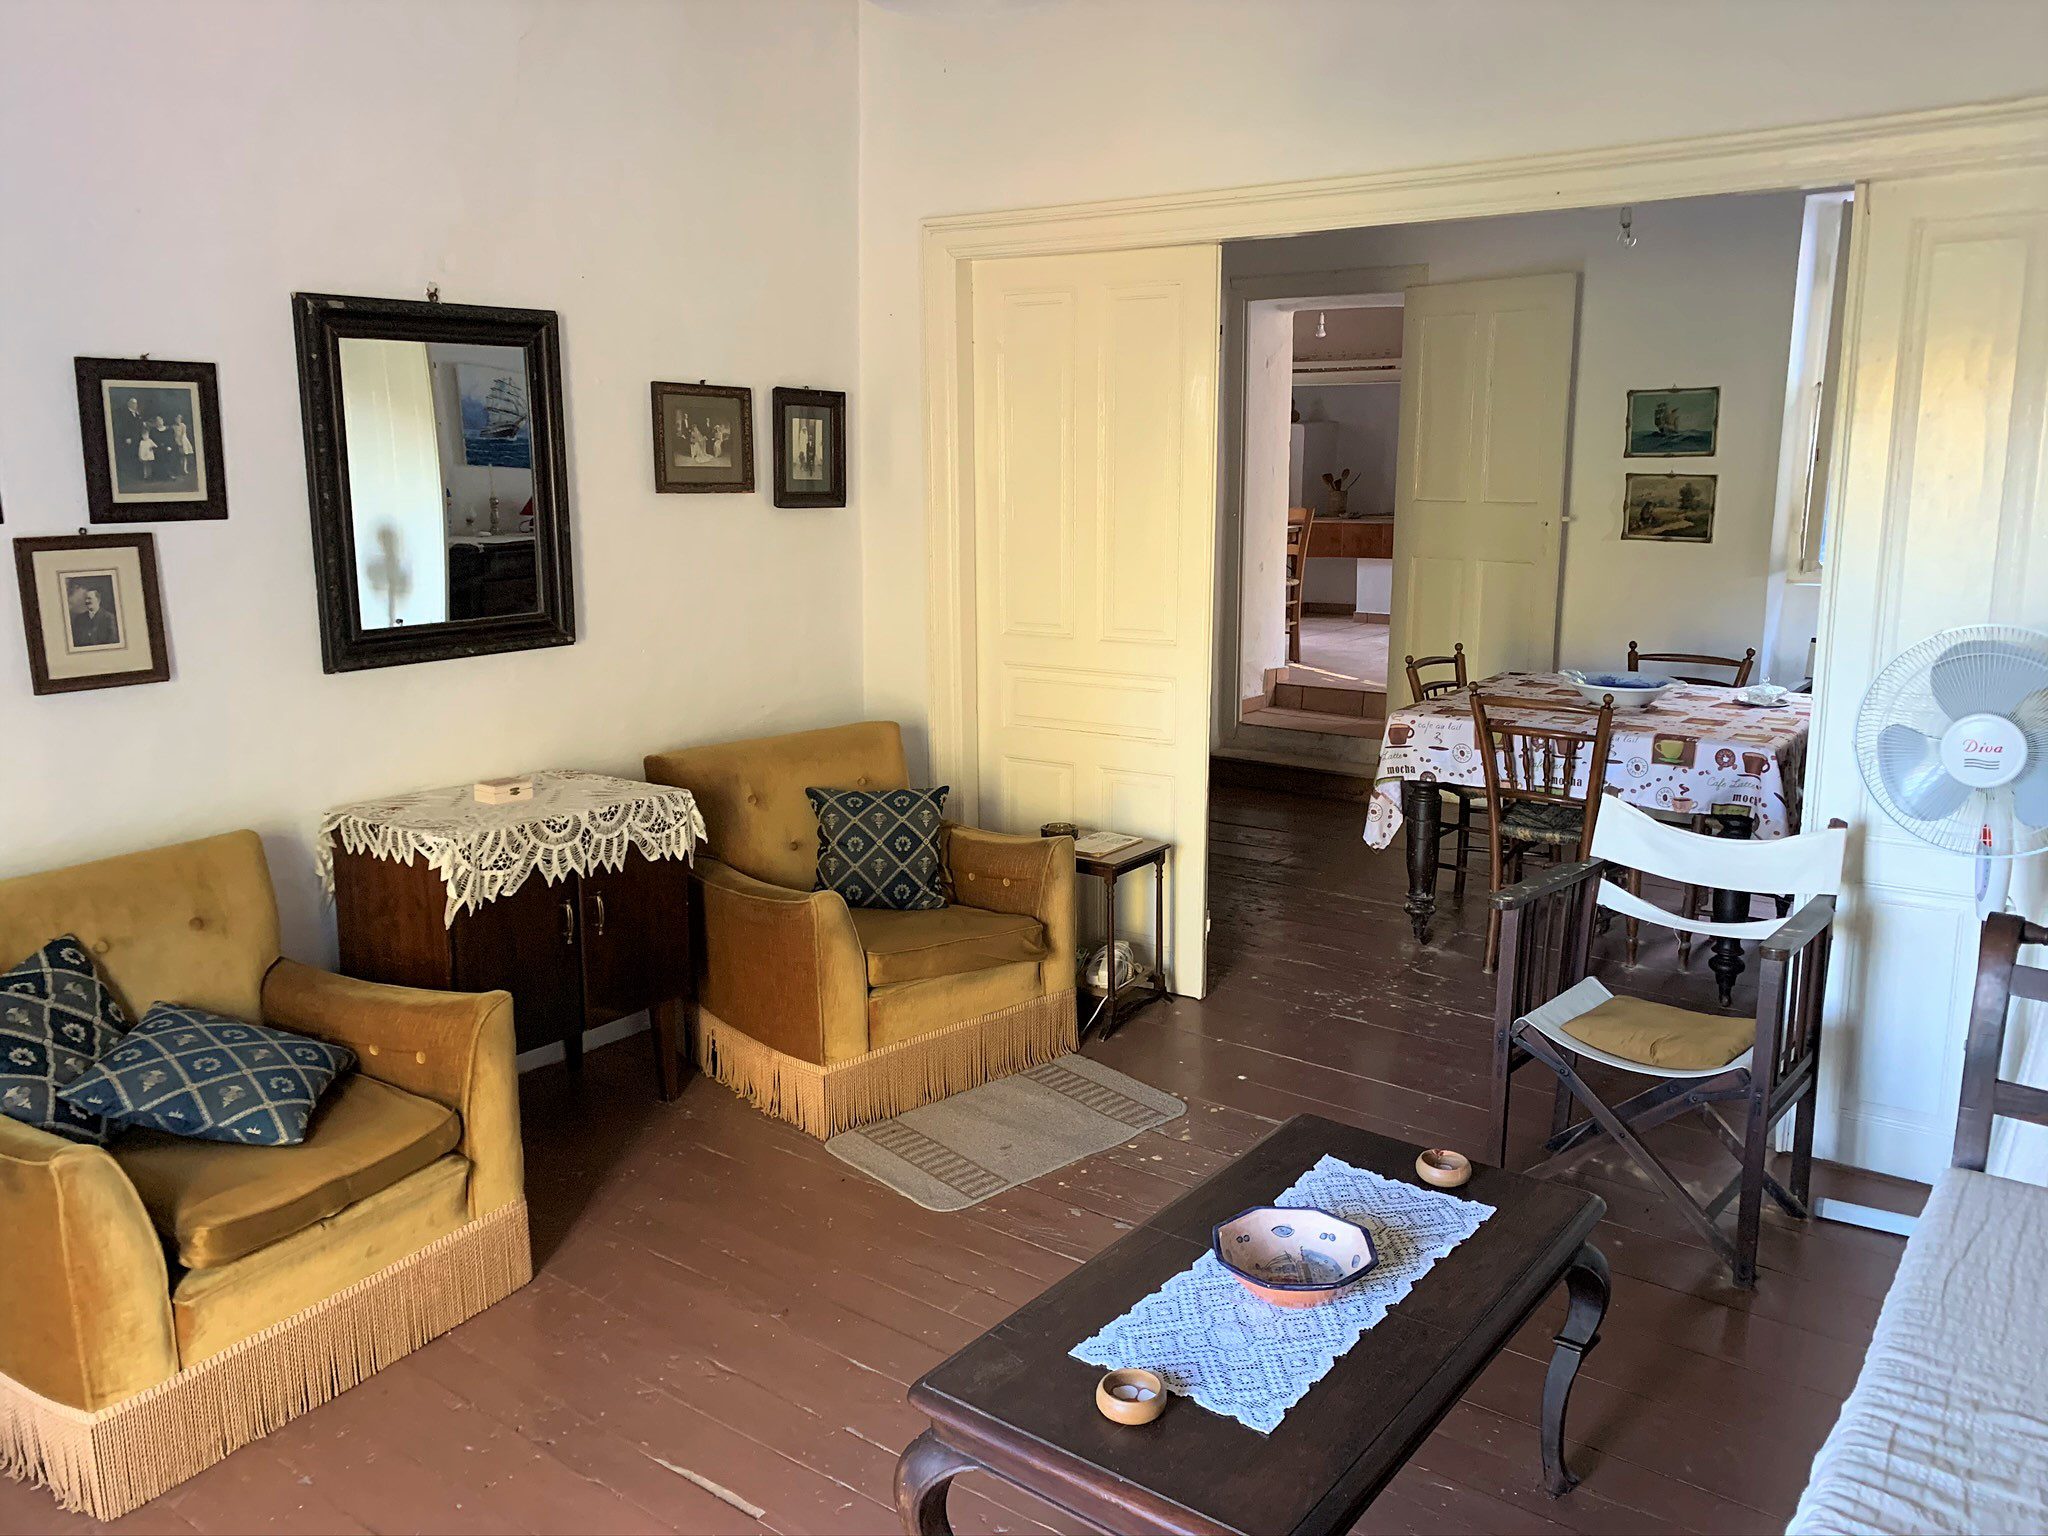 Interior space of property for sale in Ithaca Greece Stavros